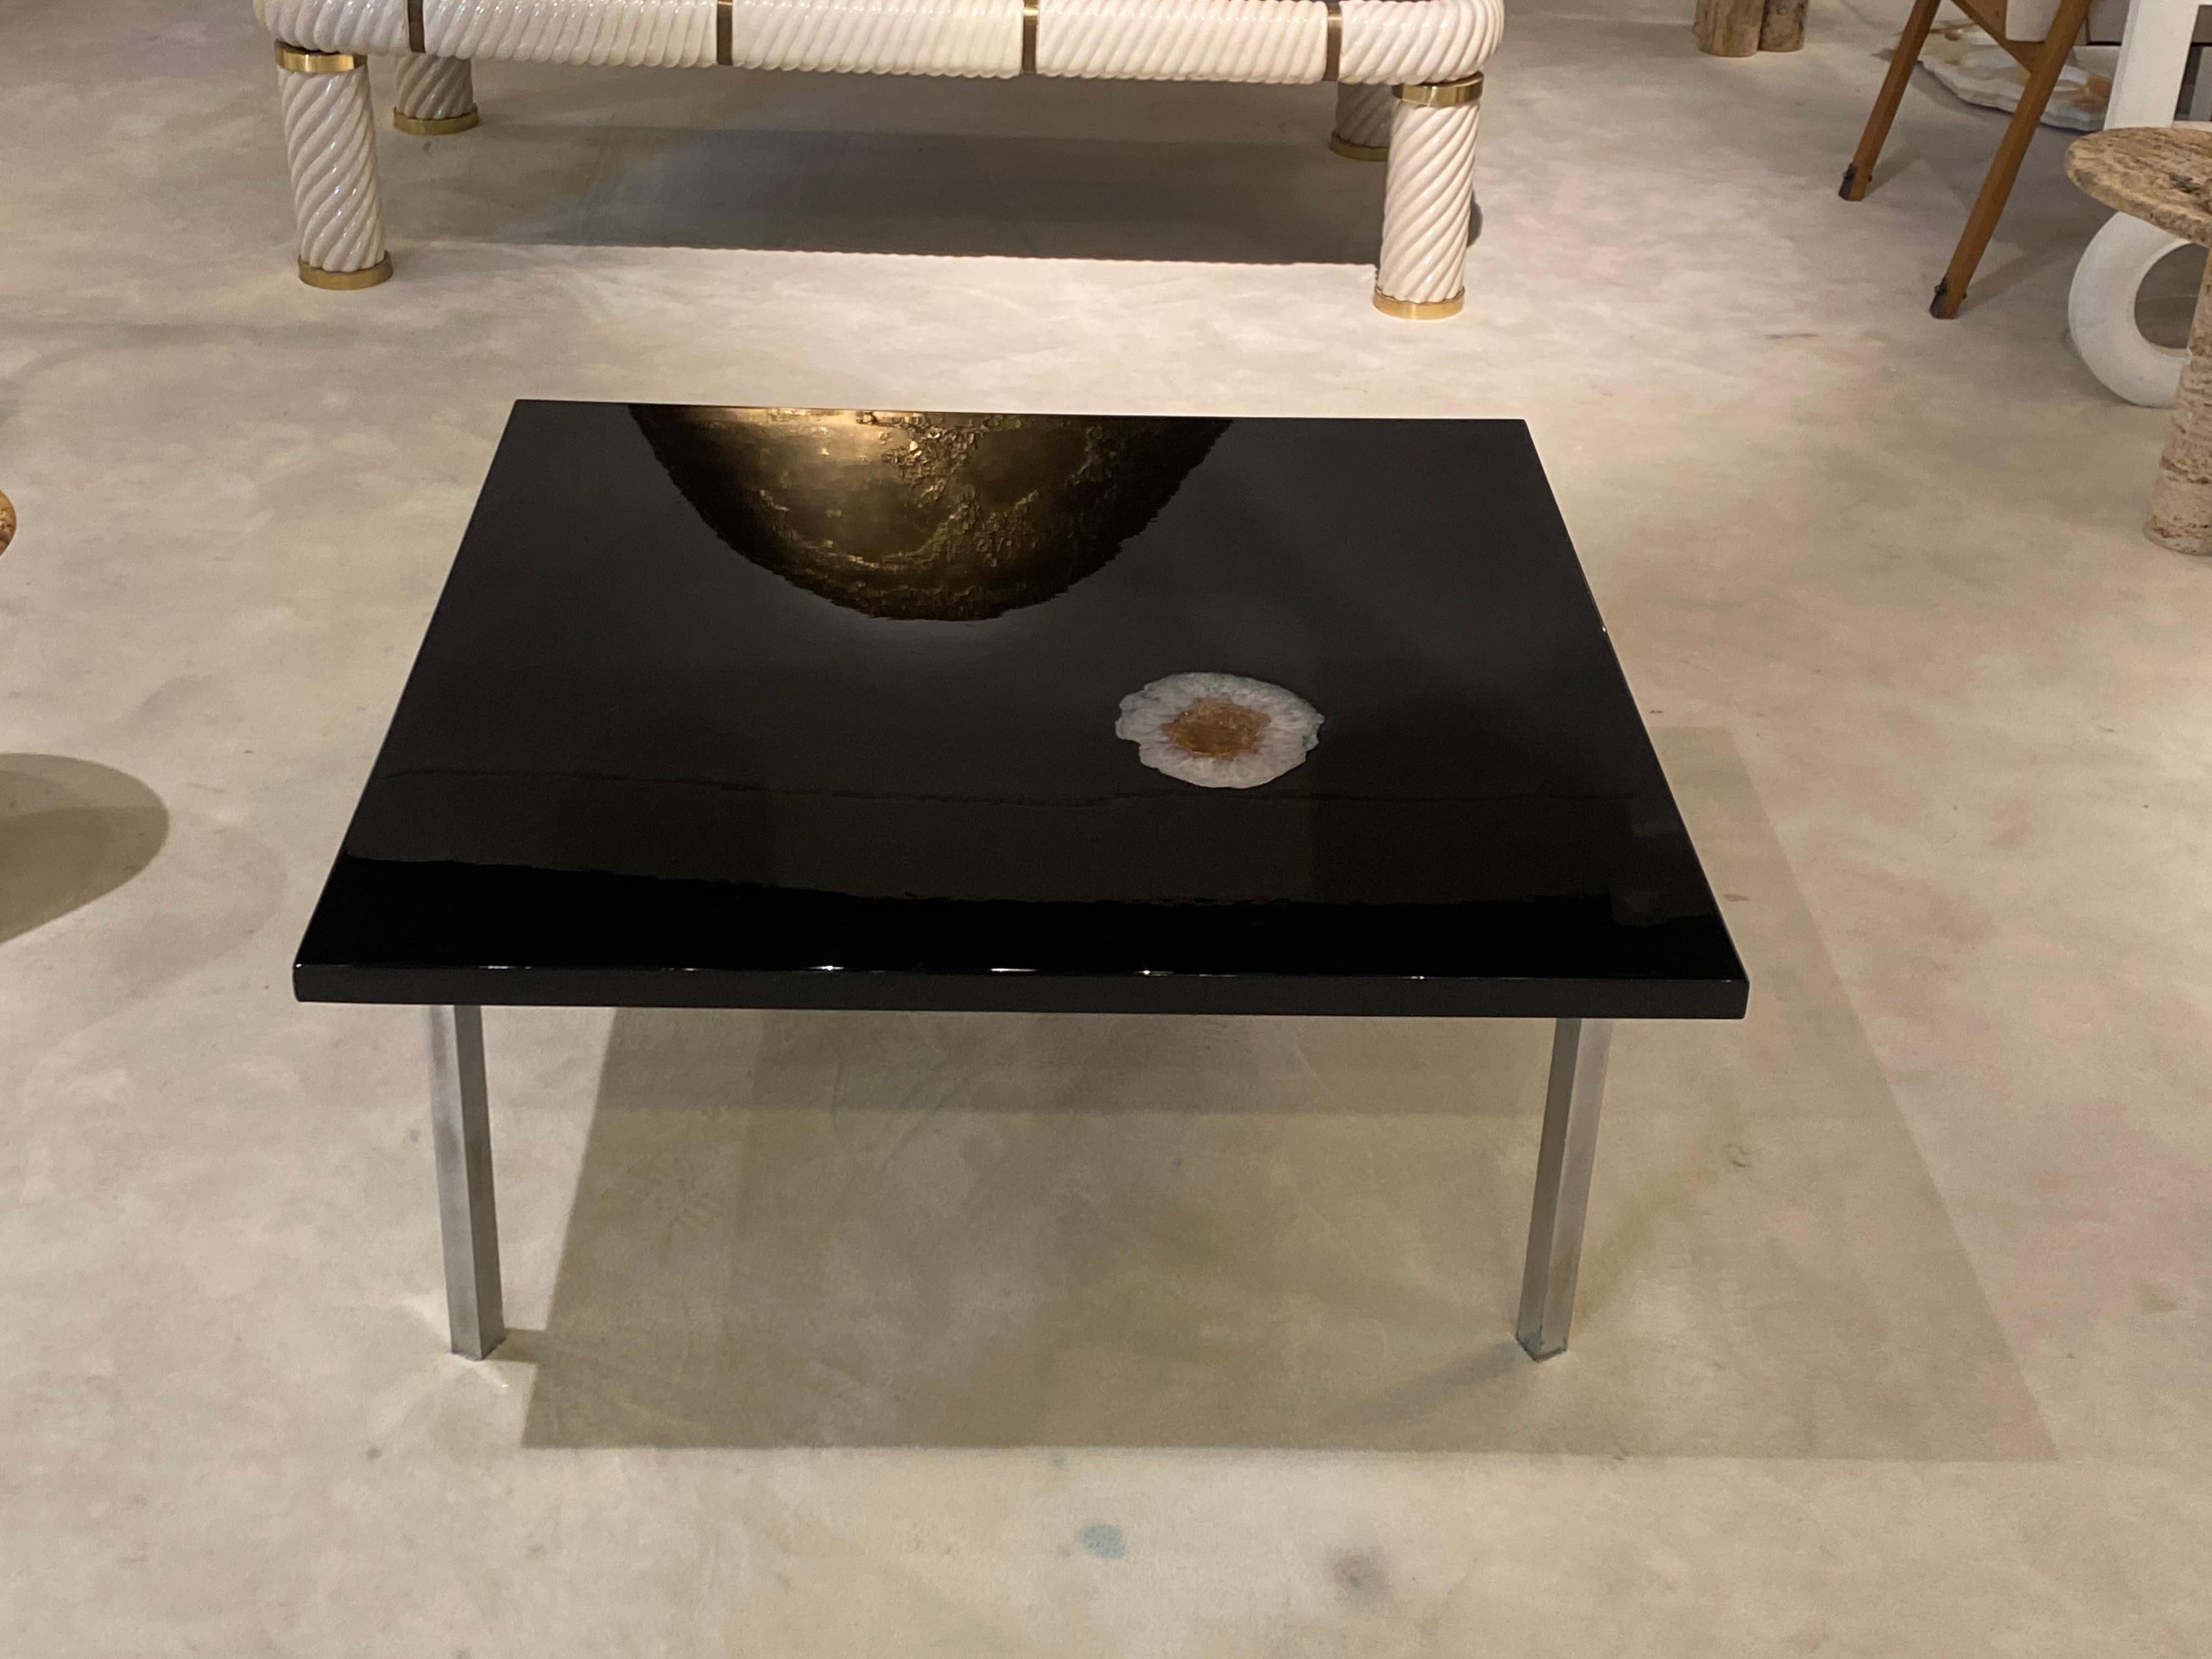 Unique black resin top with agate rock inlaid
4 chromed metal feets
Signed By Philippe Barbier
France CIrca 1968